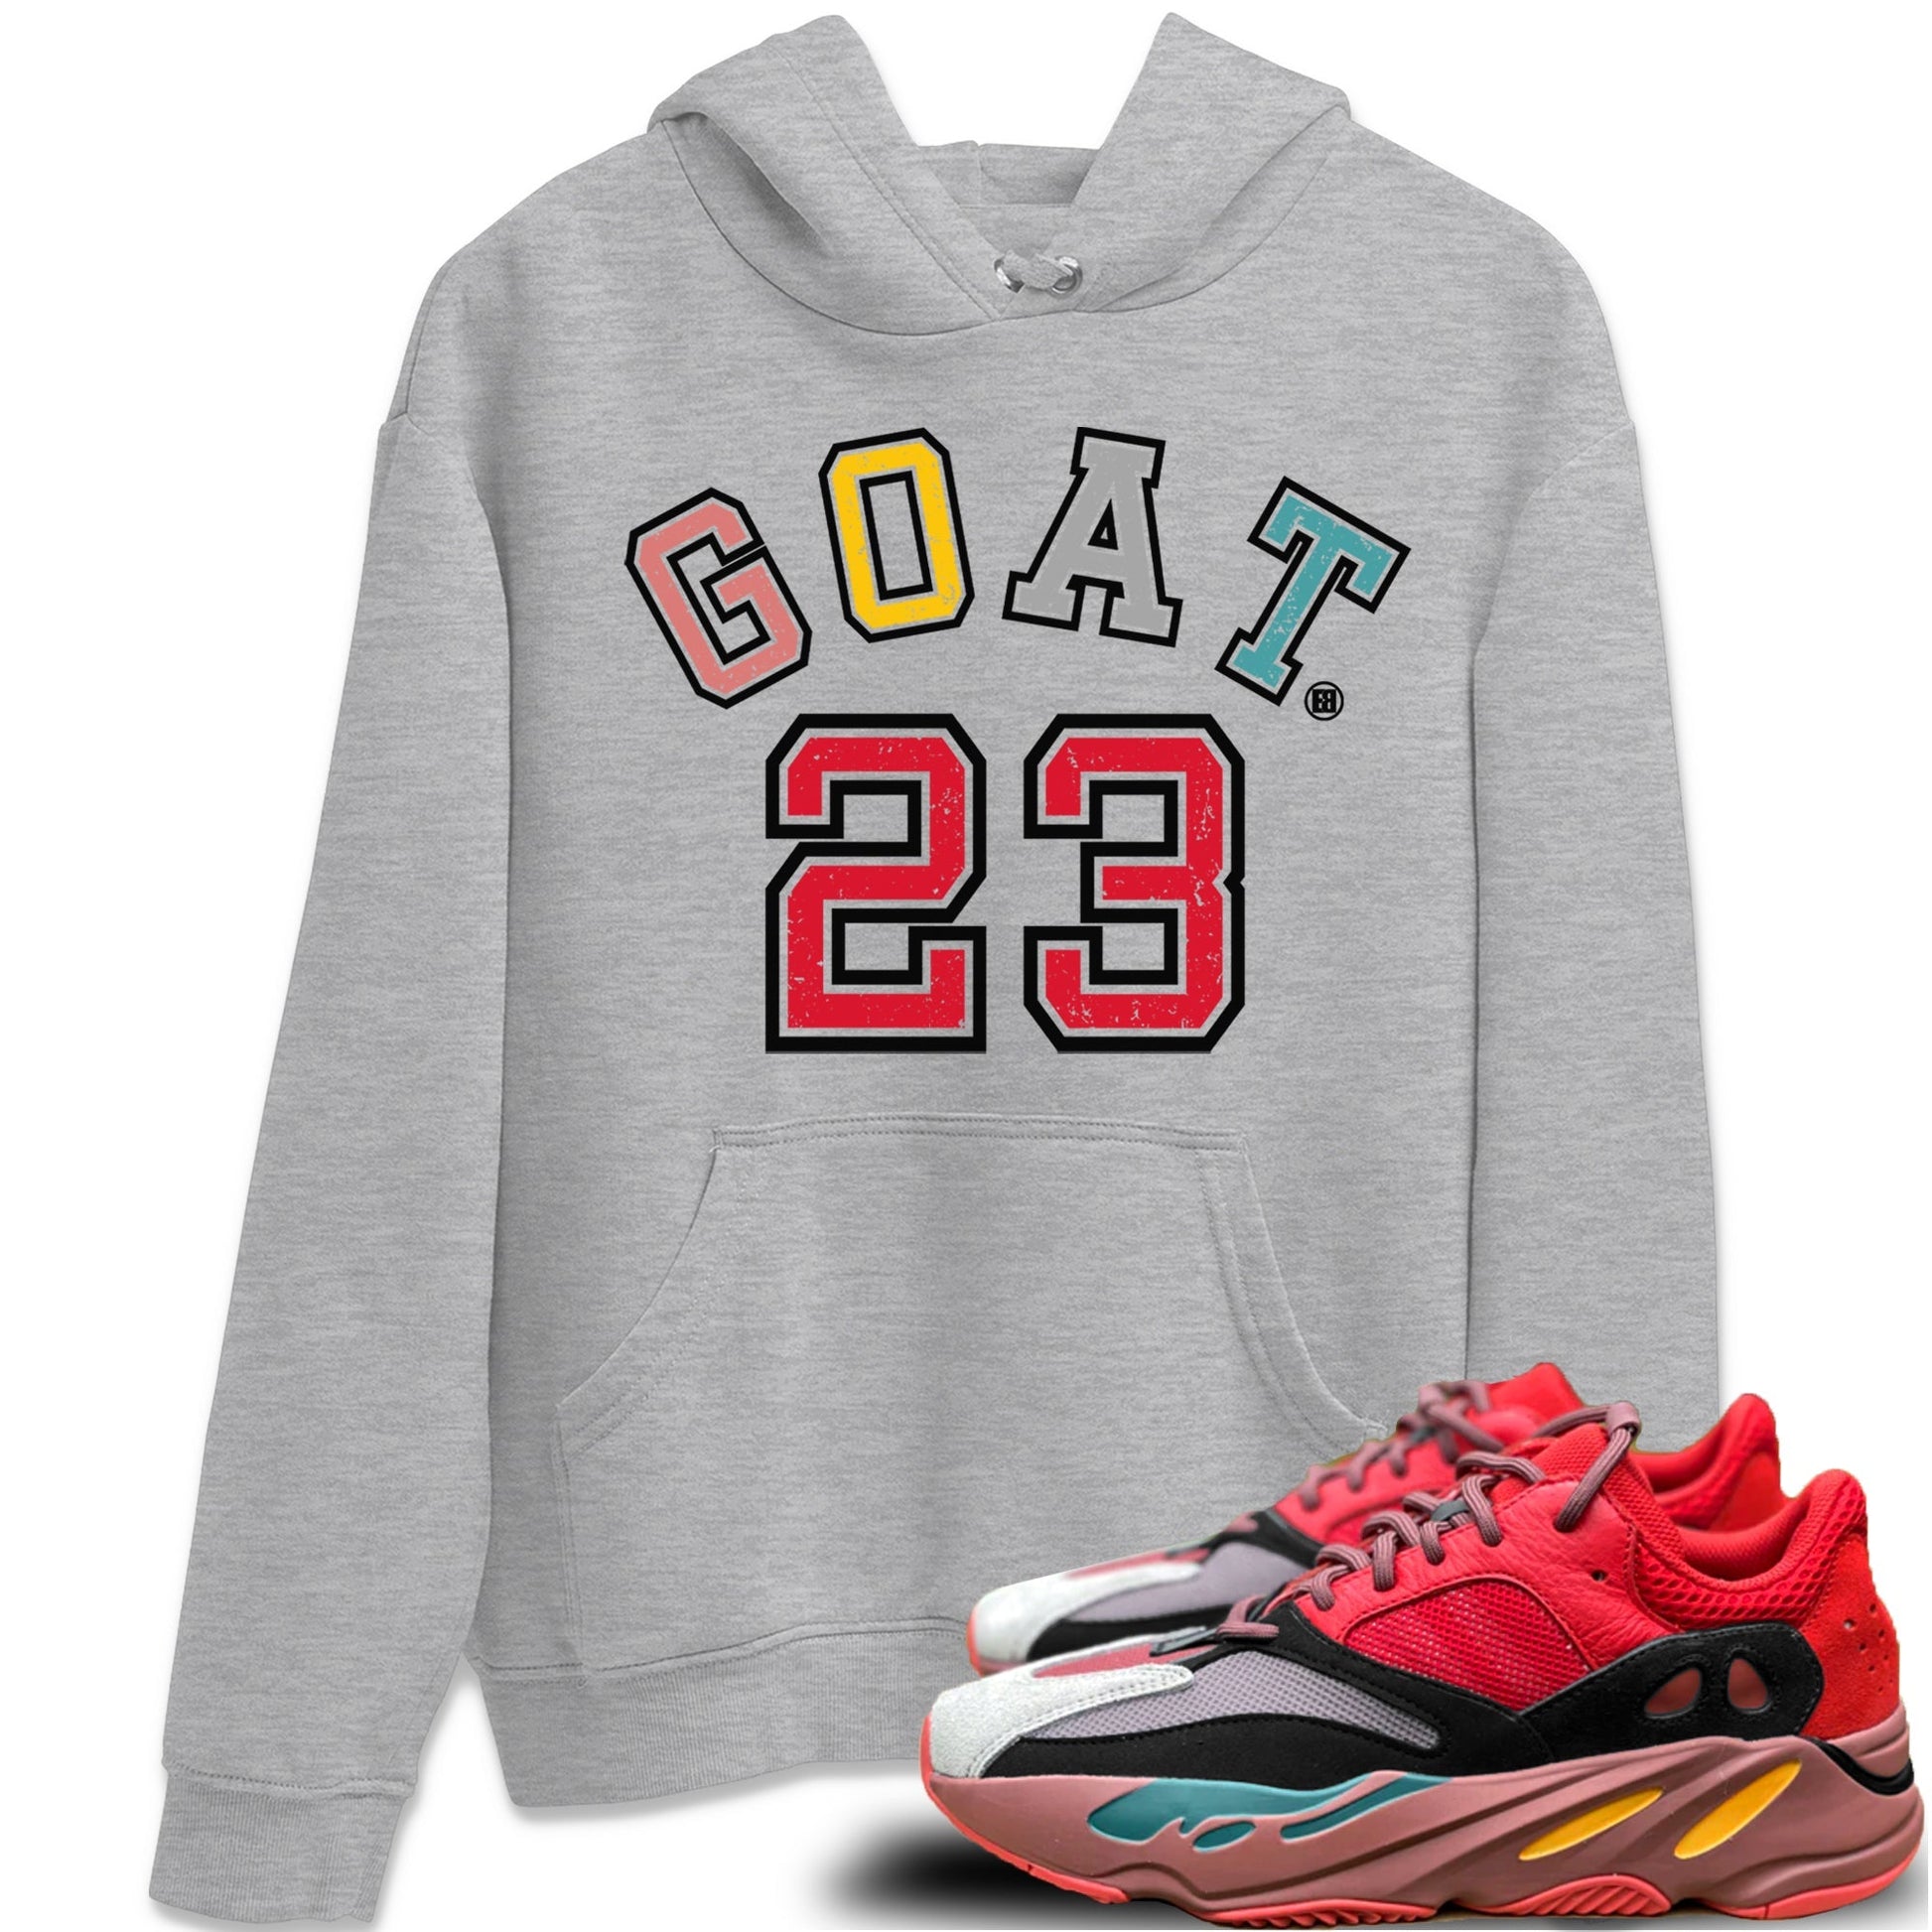 Yeezy 700 Hi-Res Red Sneaker Match Tees Goat 23 Sneaker Tees Yeezy 700 Hi-Res Red Sneaker Release Tees Unisex Shirts